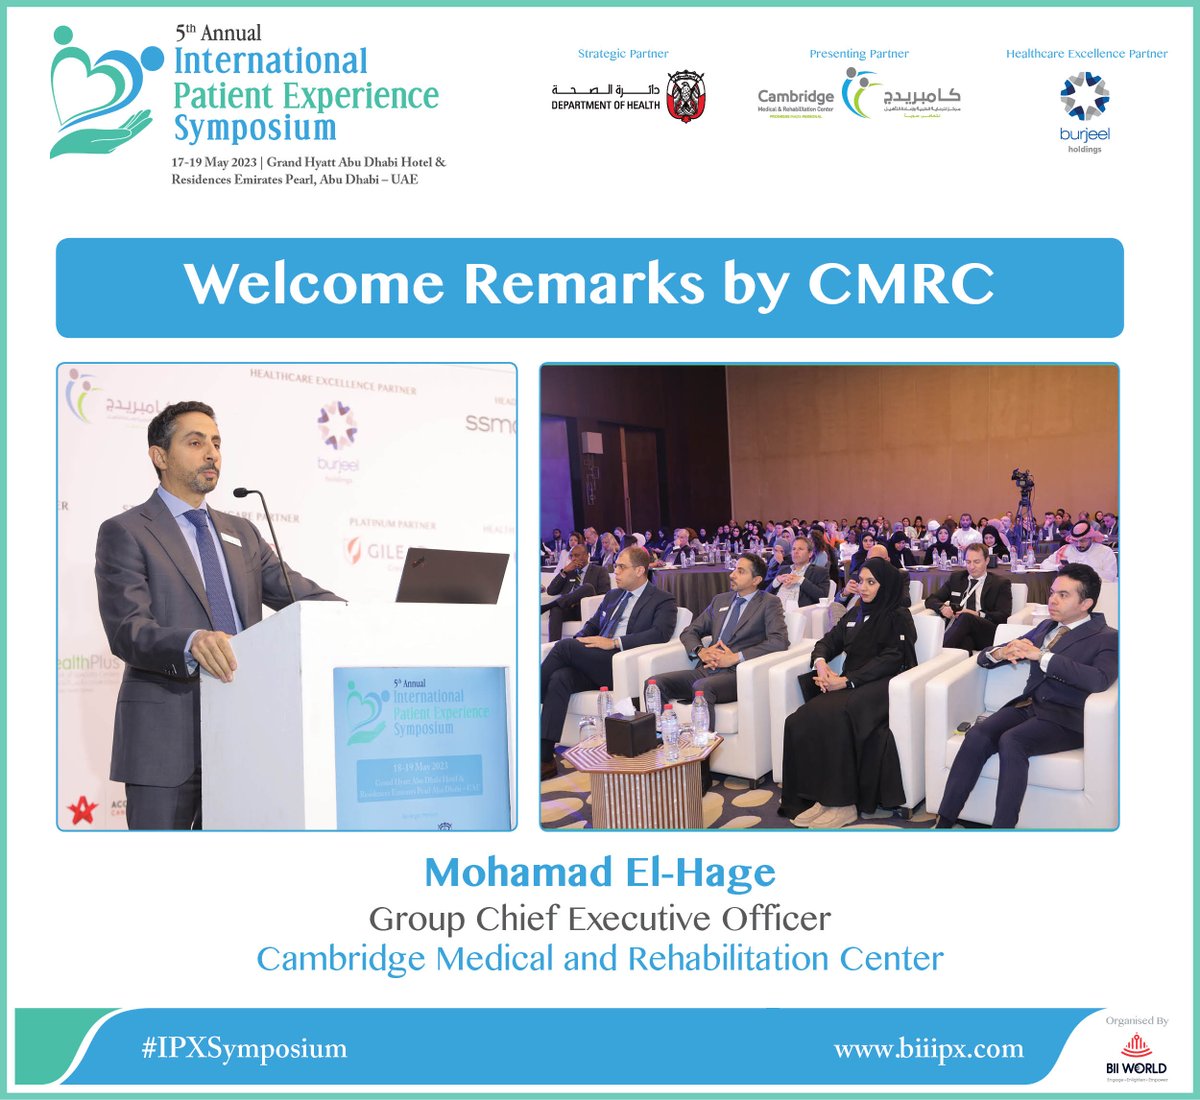 Mohamad El-Hage inaugurated the 5th Annual International Patient Experience Symposium on the 18th of May 2023.
#IPXSymposium #patientexperience #patientcare #patientdata #patientengagement #patientjourney #patients #healthcareinnovation #healthcaretransformation #virtualhealth